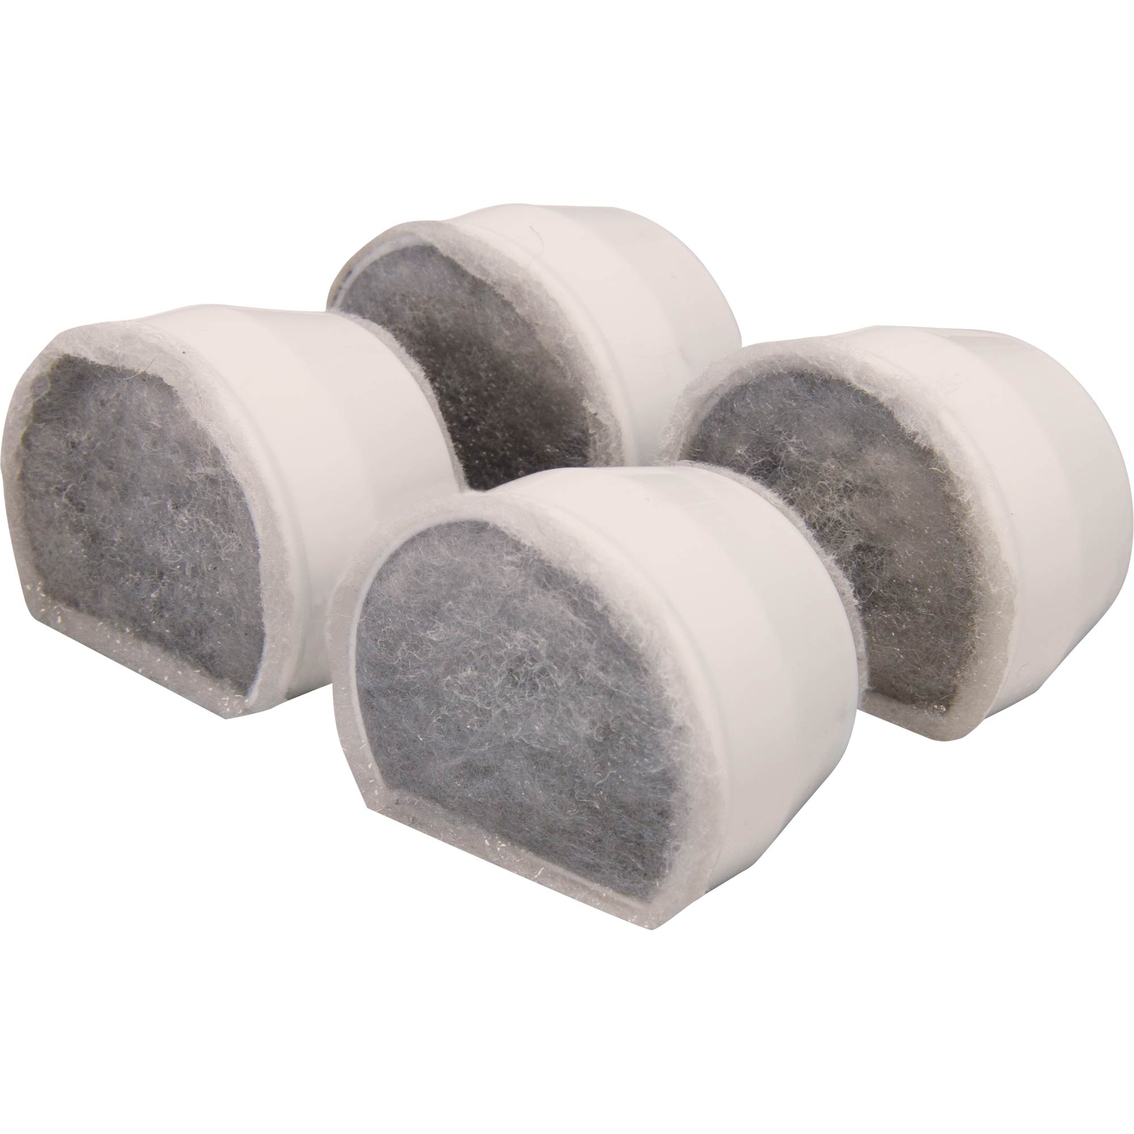 PetSafe Single Cell Replacement Filters for Pet Water Fountains 4 Pk. - Image 2 of 2